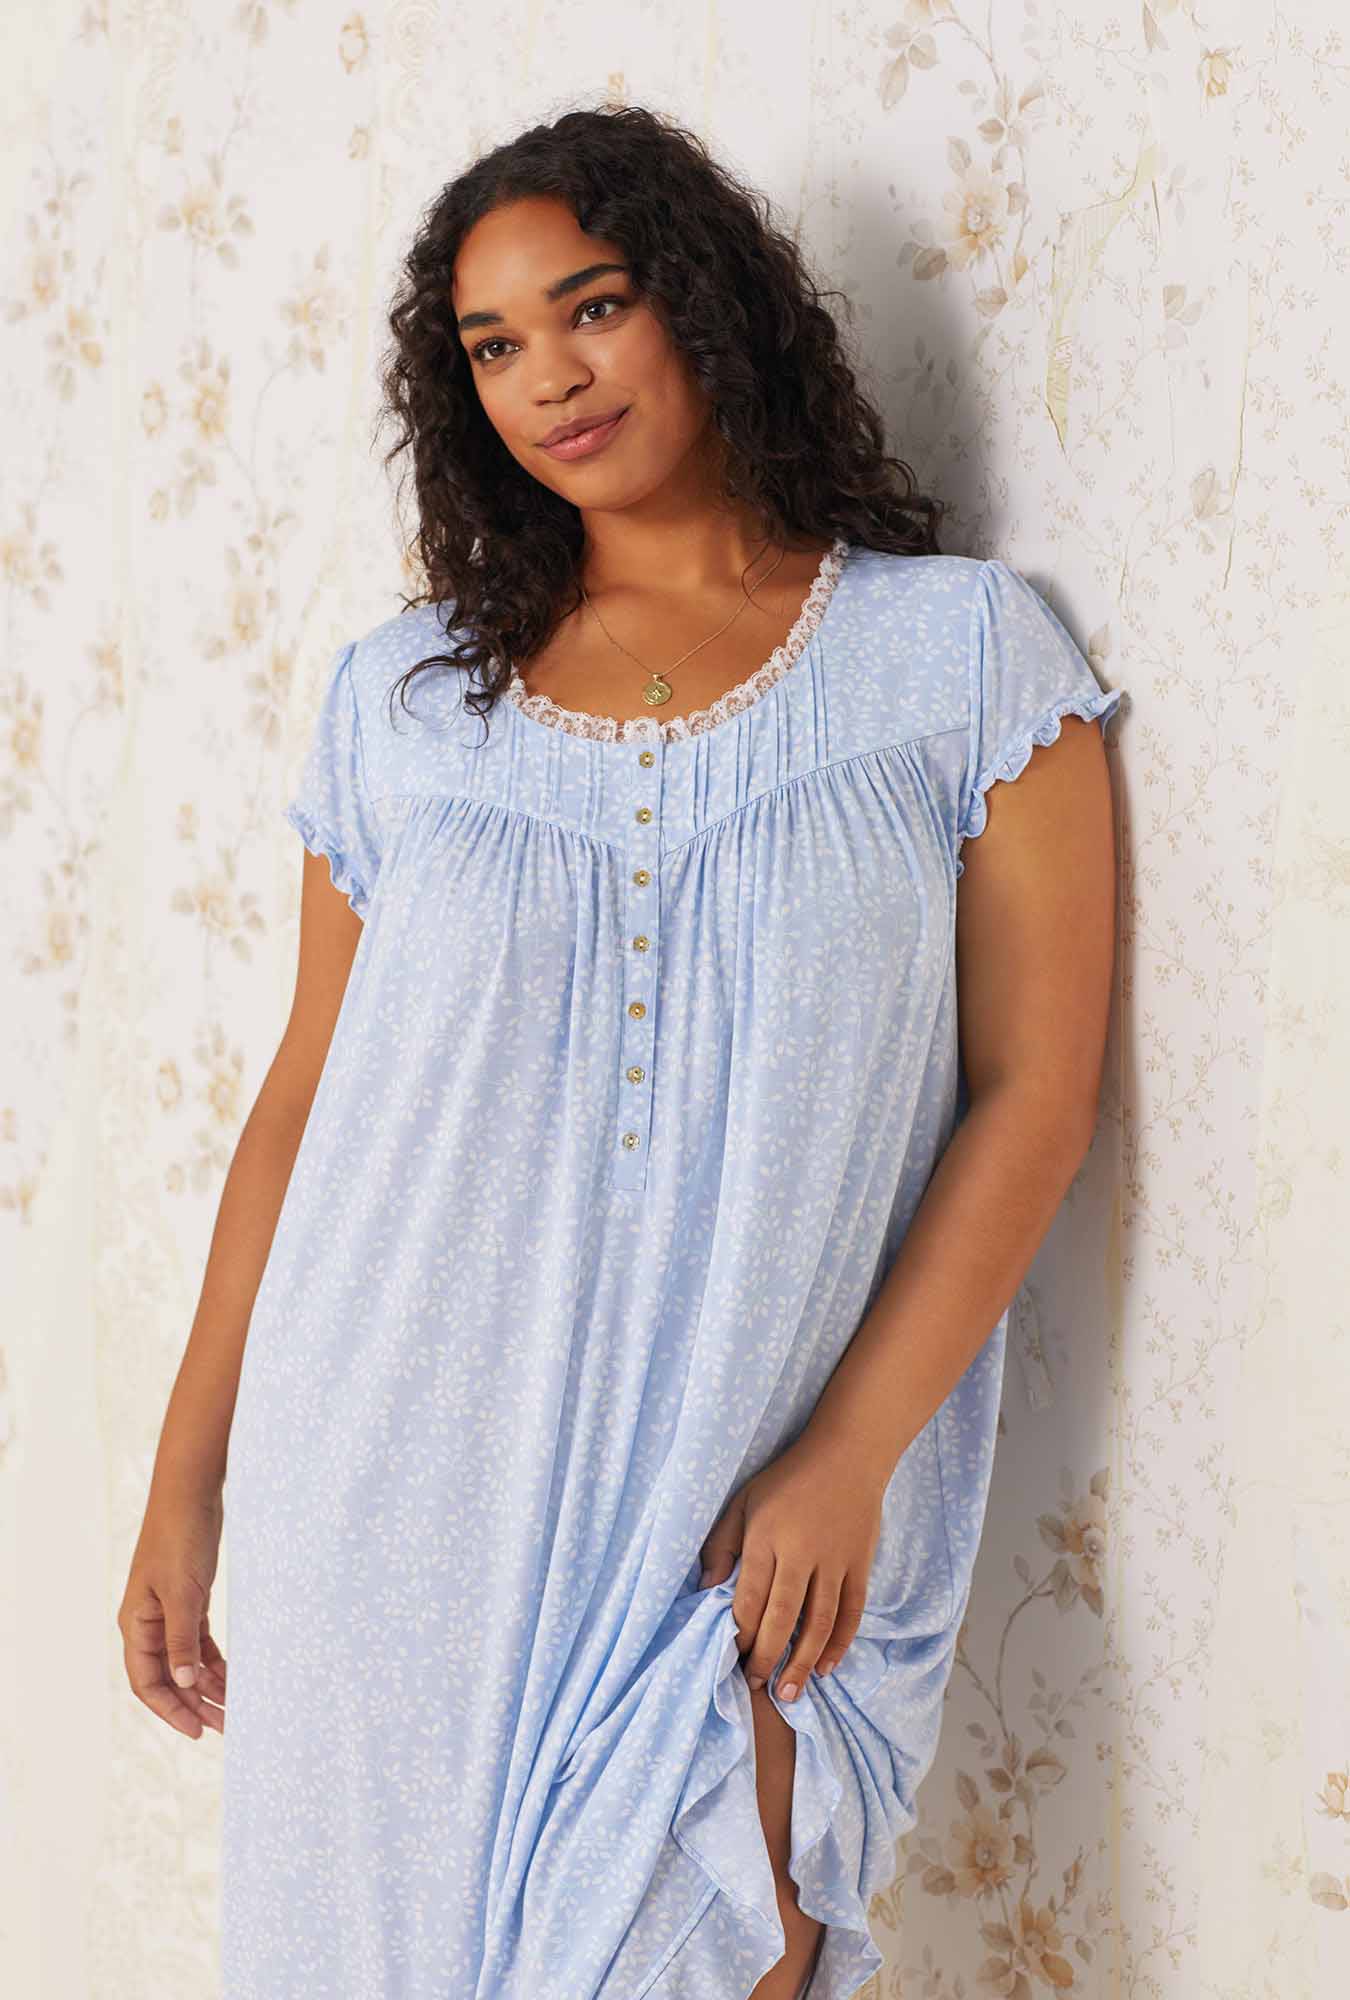 Nightgown PLUS SIZE White Pure Cotton and Crochet Lace. Romantic Sleepwear,  Lingerie, Lounge-wear, Made to Order, Aust. Sizing Xs XXXL 